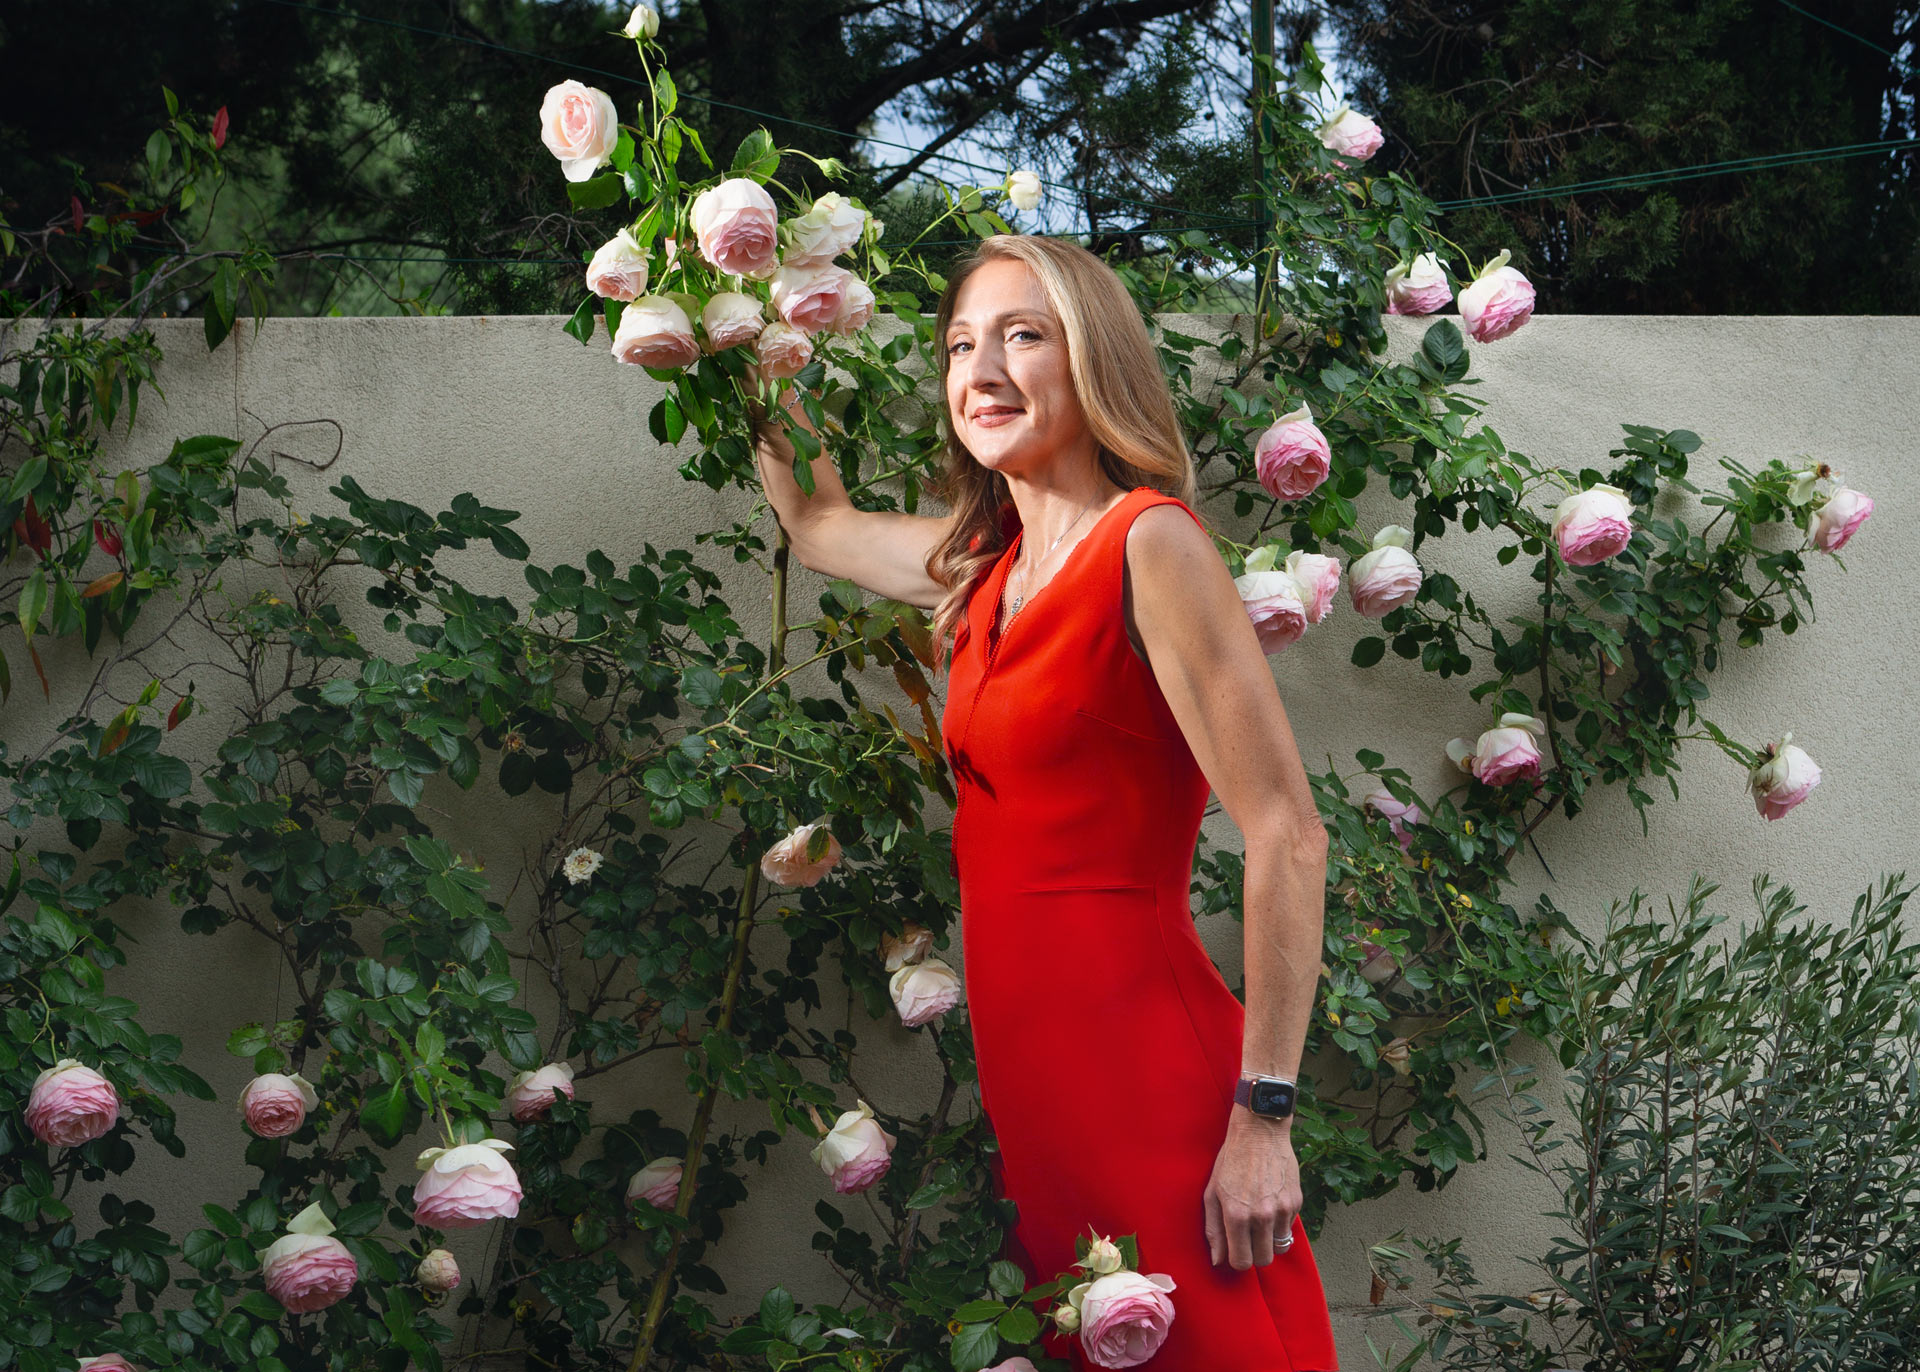 Portrait of a woman in a red dress smelling roses